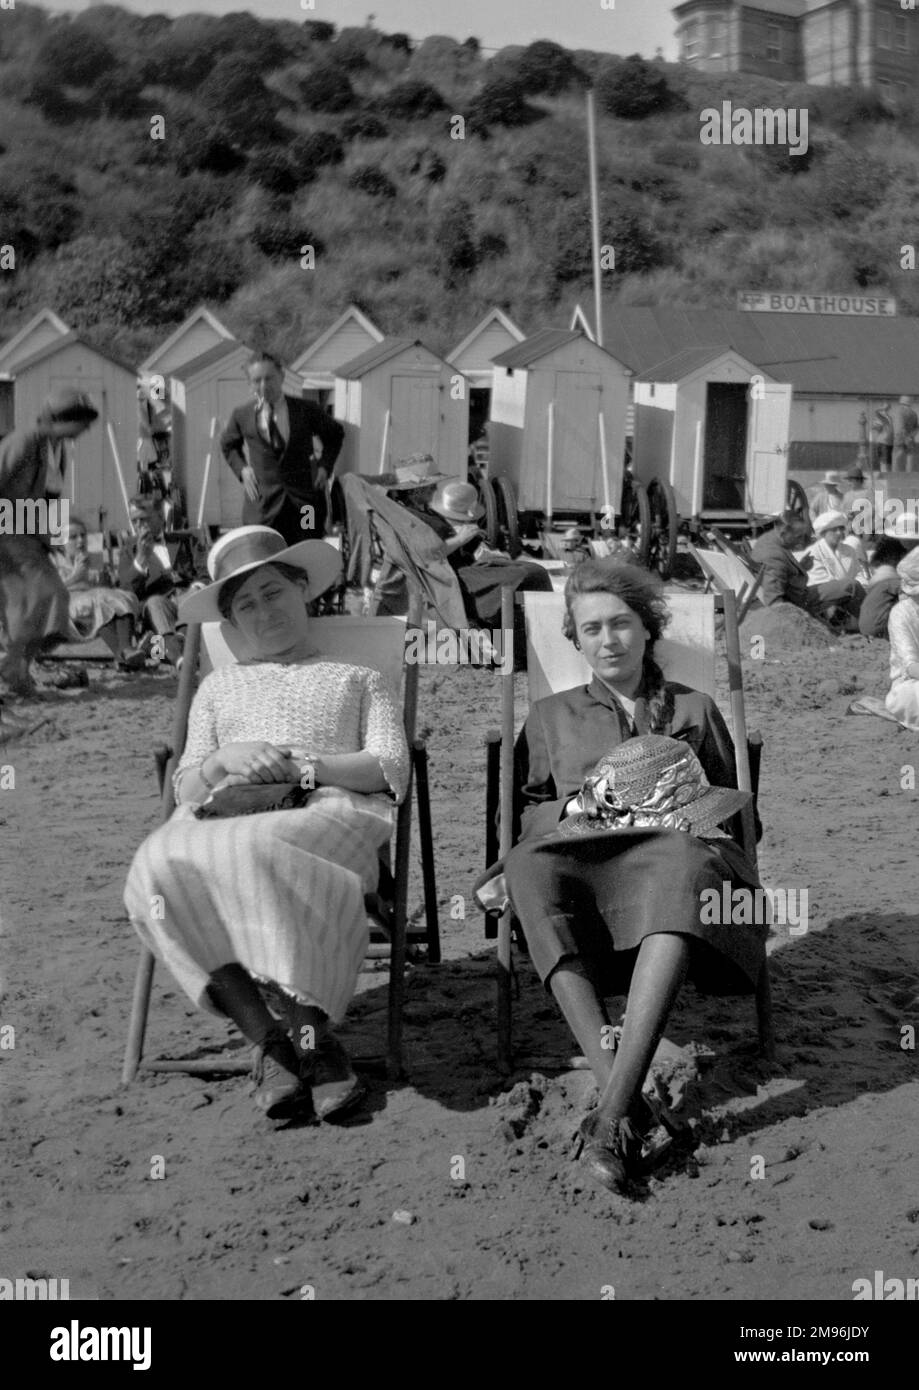 Two young women sitting on a beach in deckchairs, with bathing huts in the background. Stock Photo